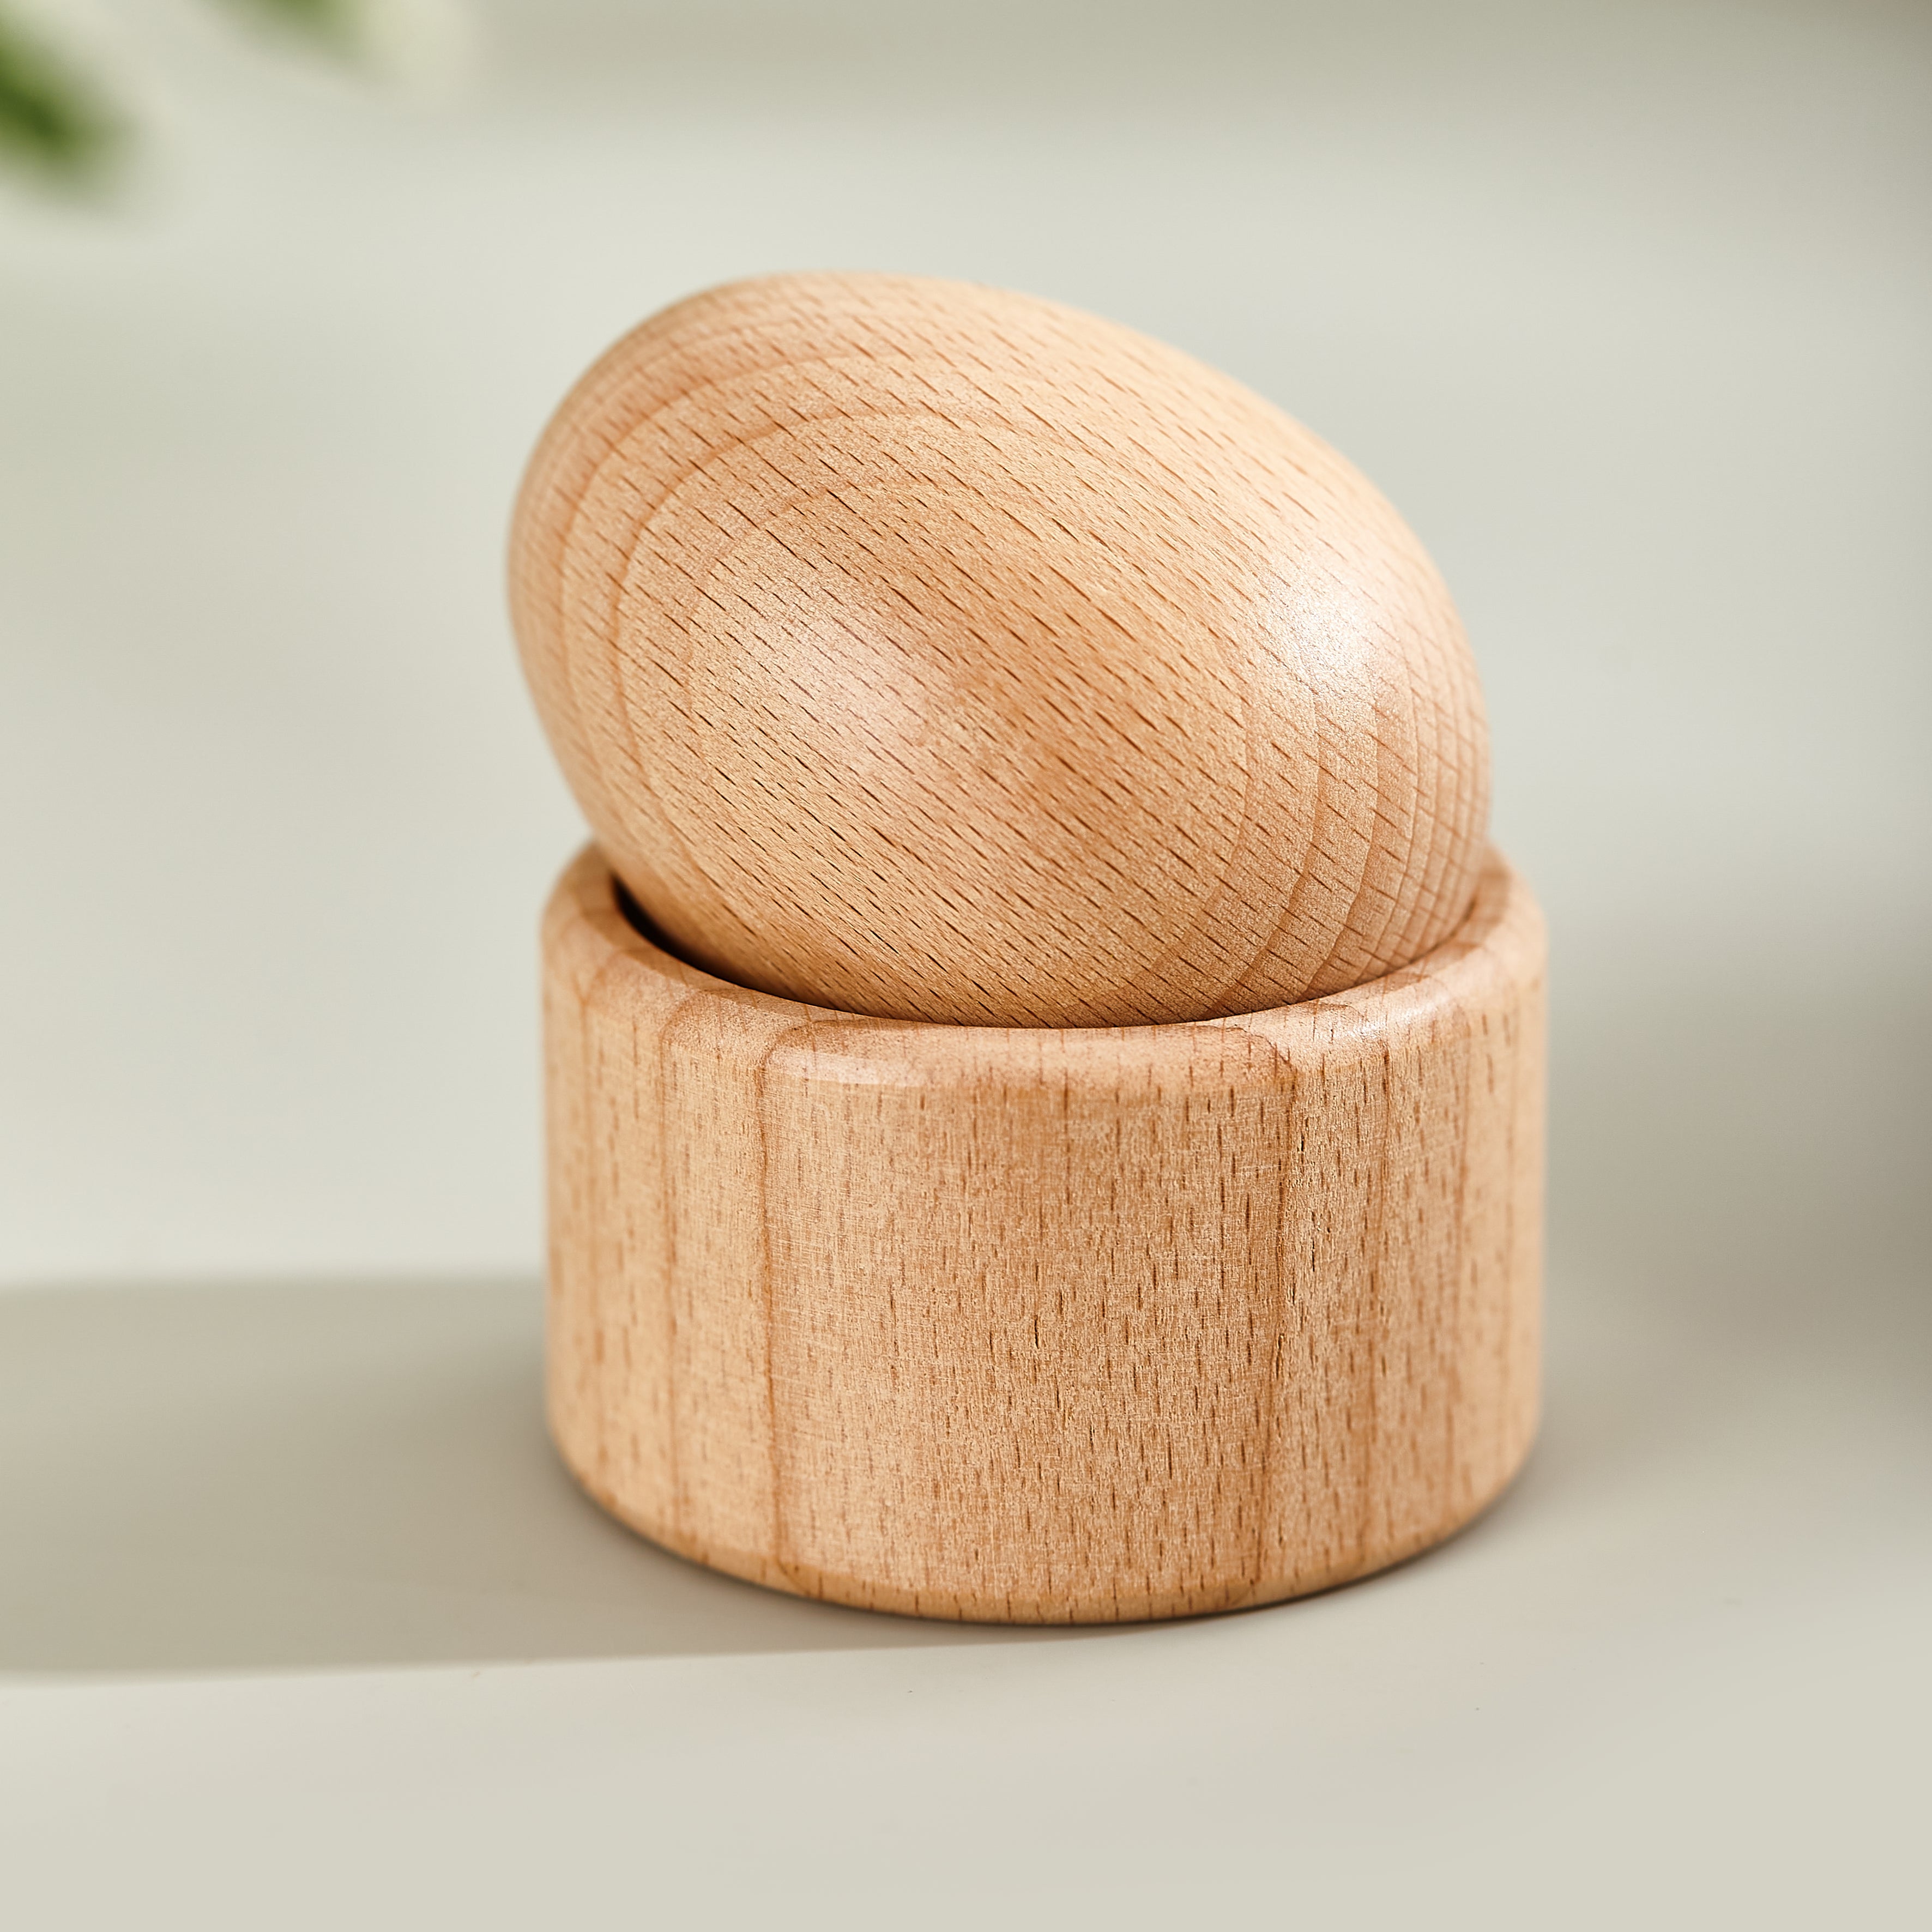 Montessori wooden toy egg with cup